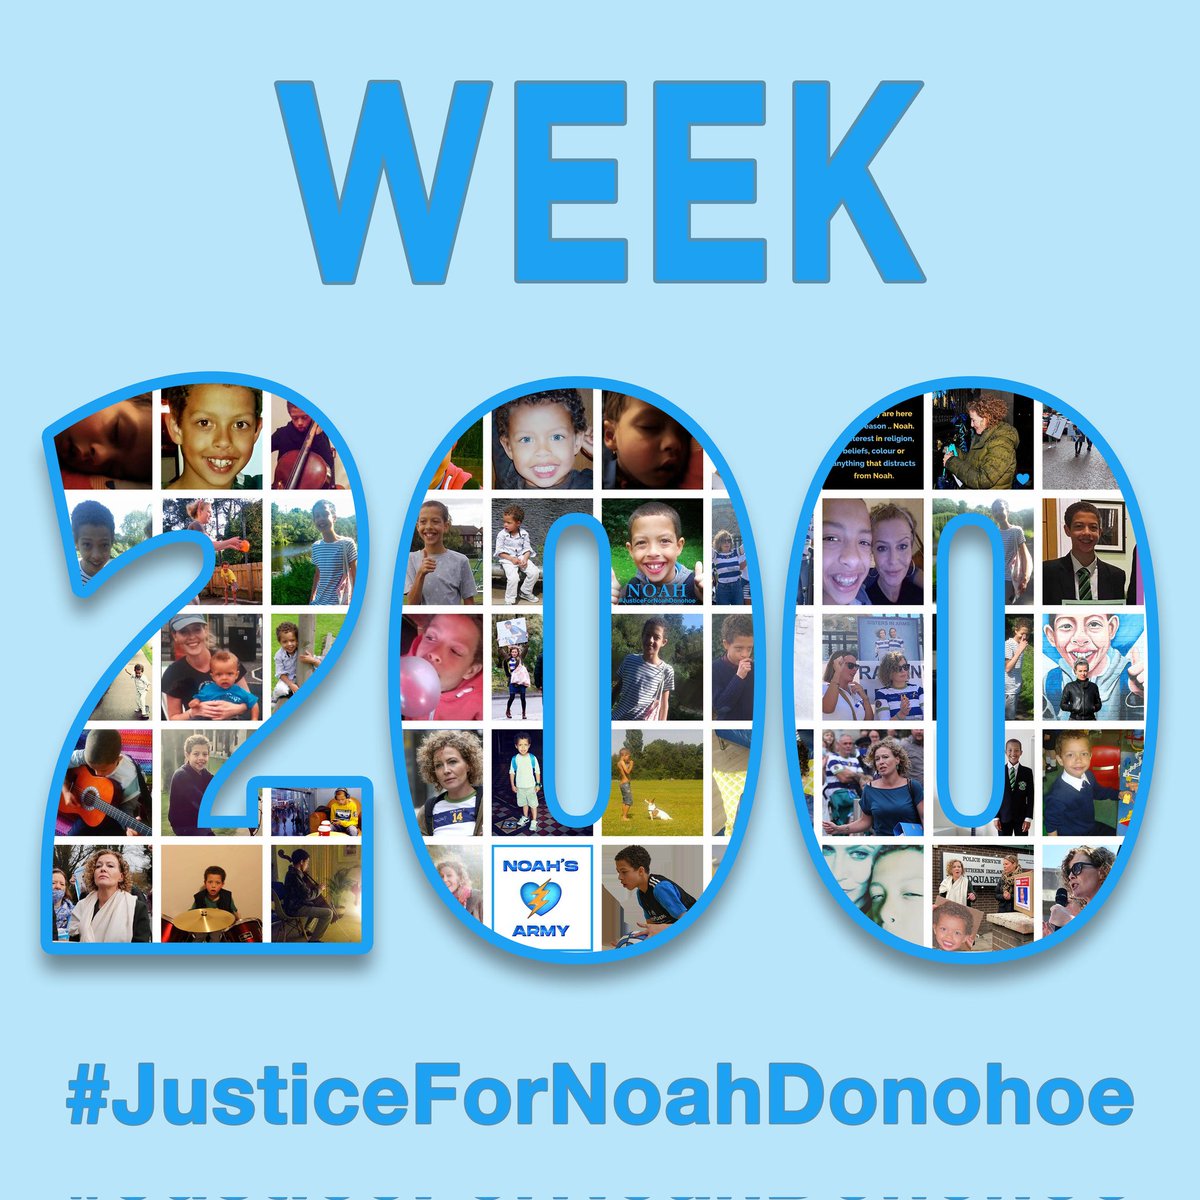 How on earth are we at #Week200 ? This Beautiful young boy needs justice, and the truth needs to come out!